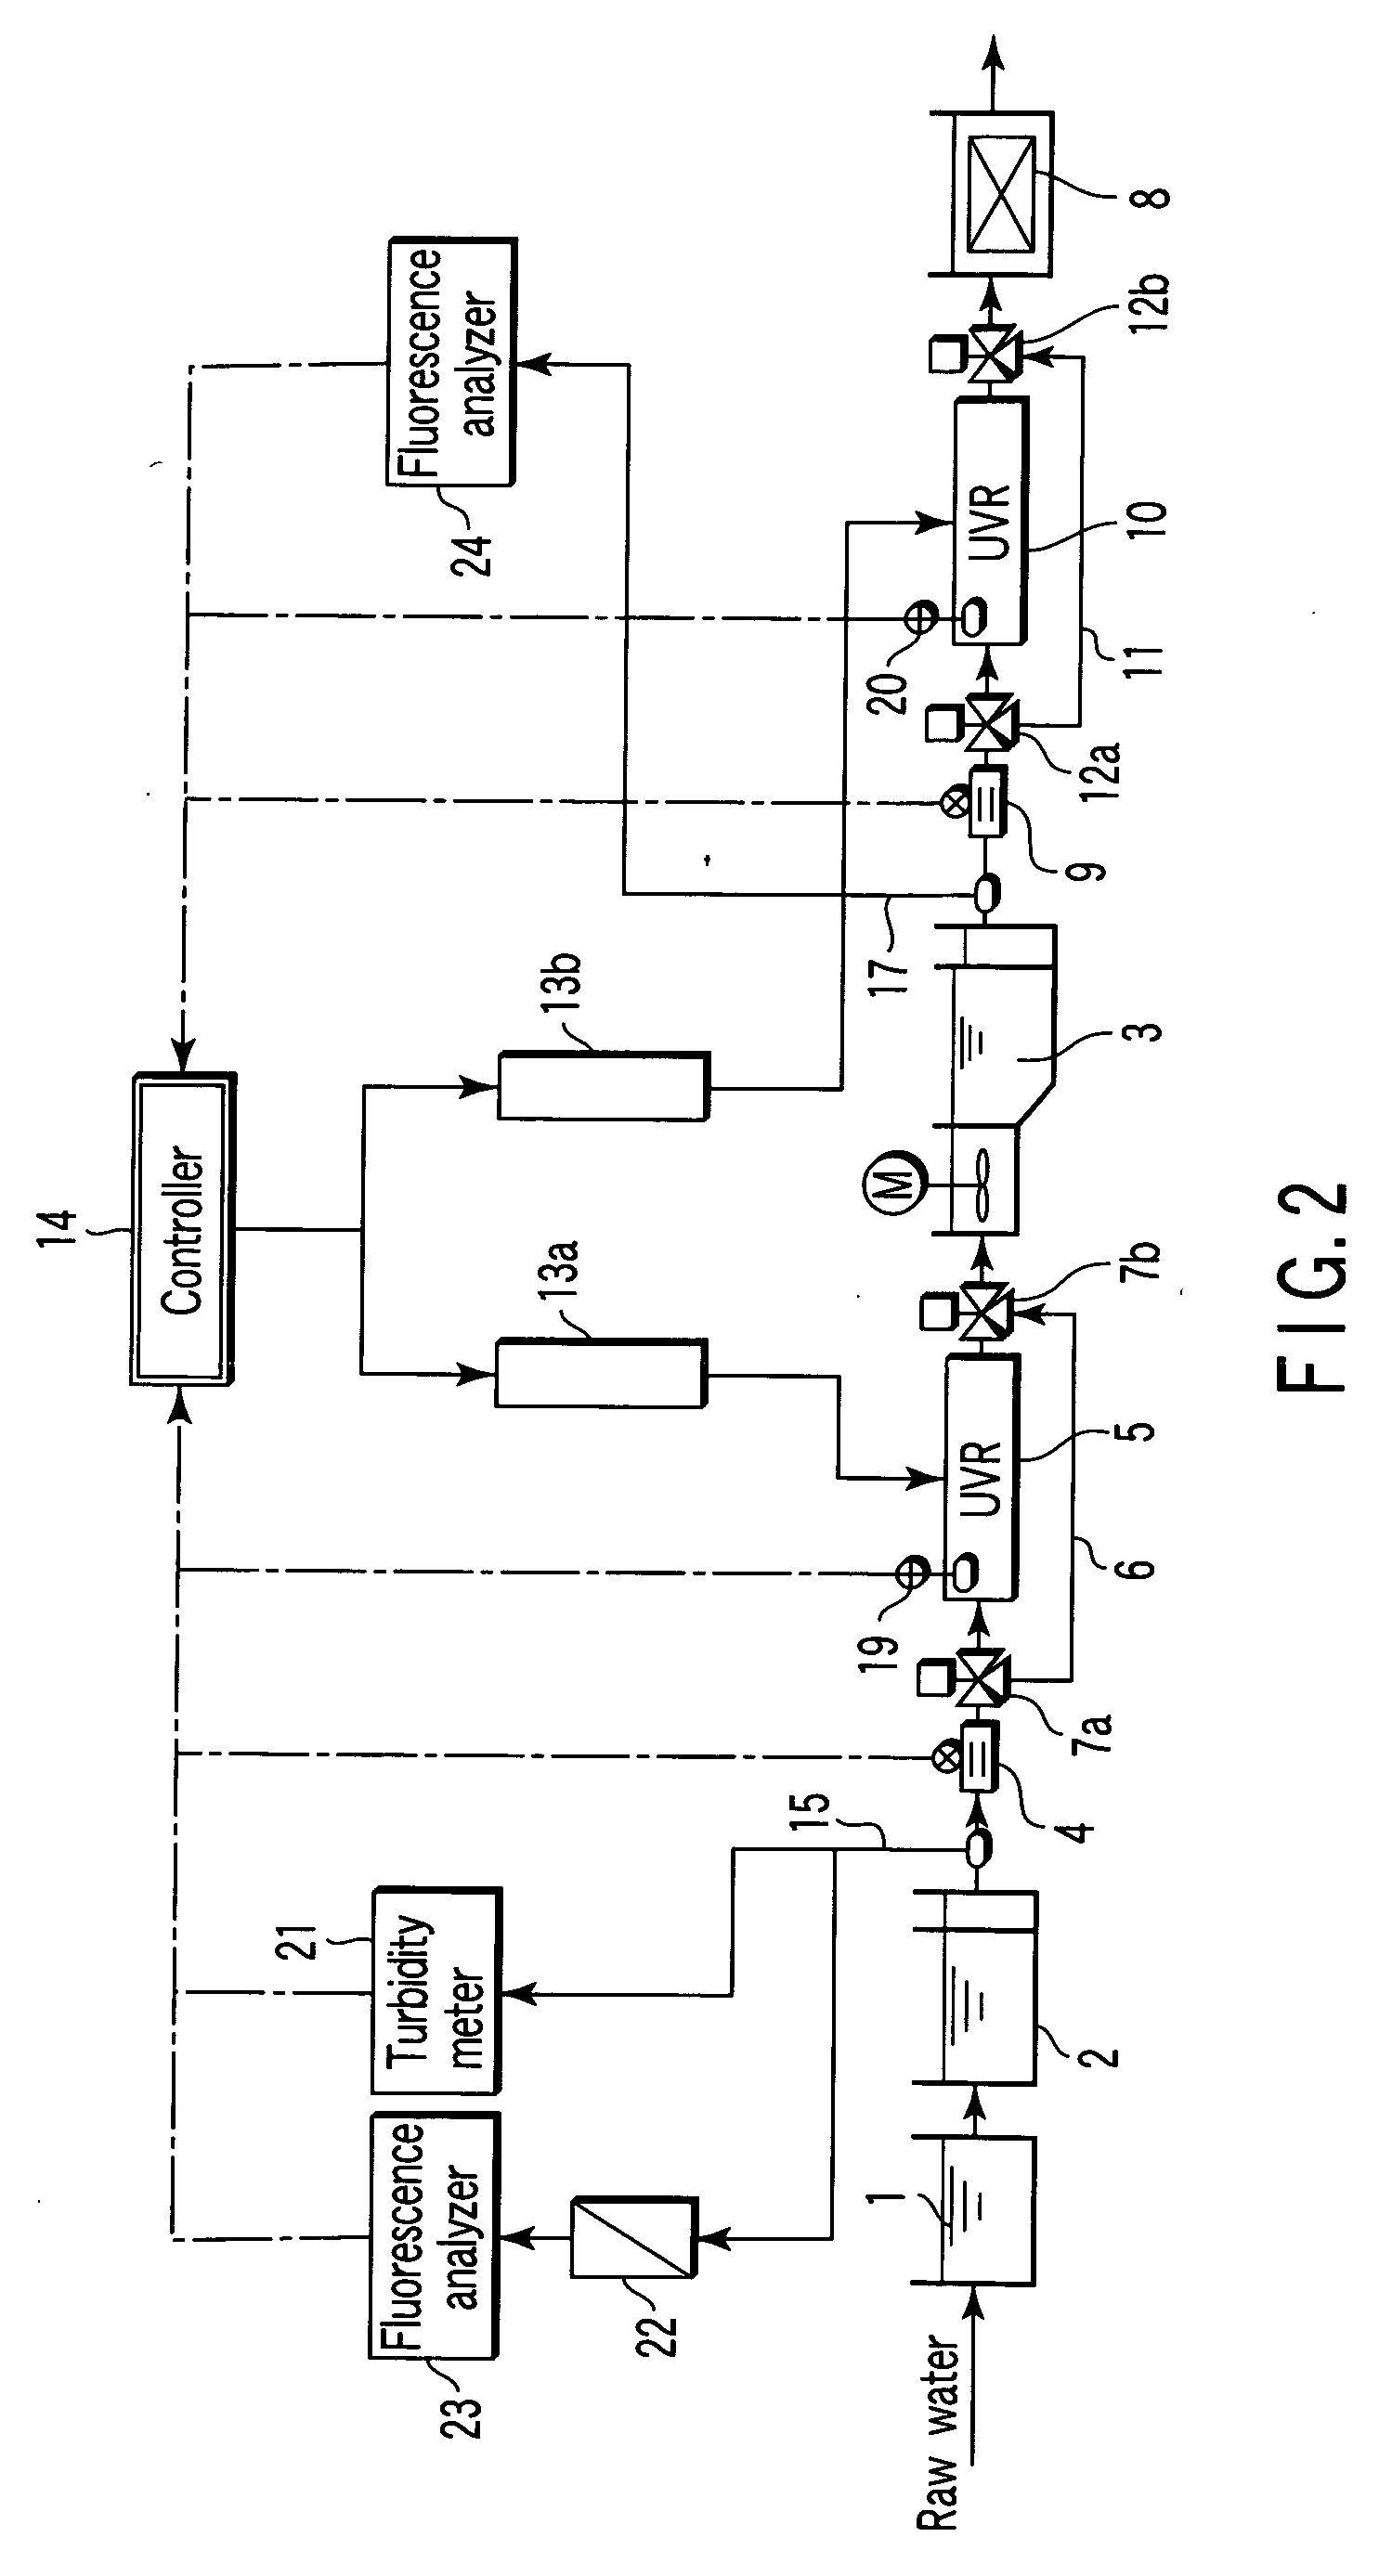 Ultraviolet radiation water treatment system